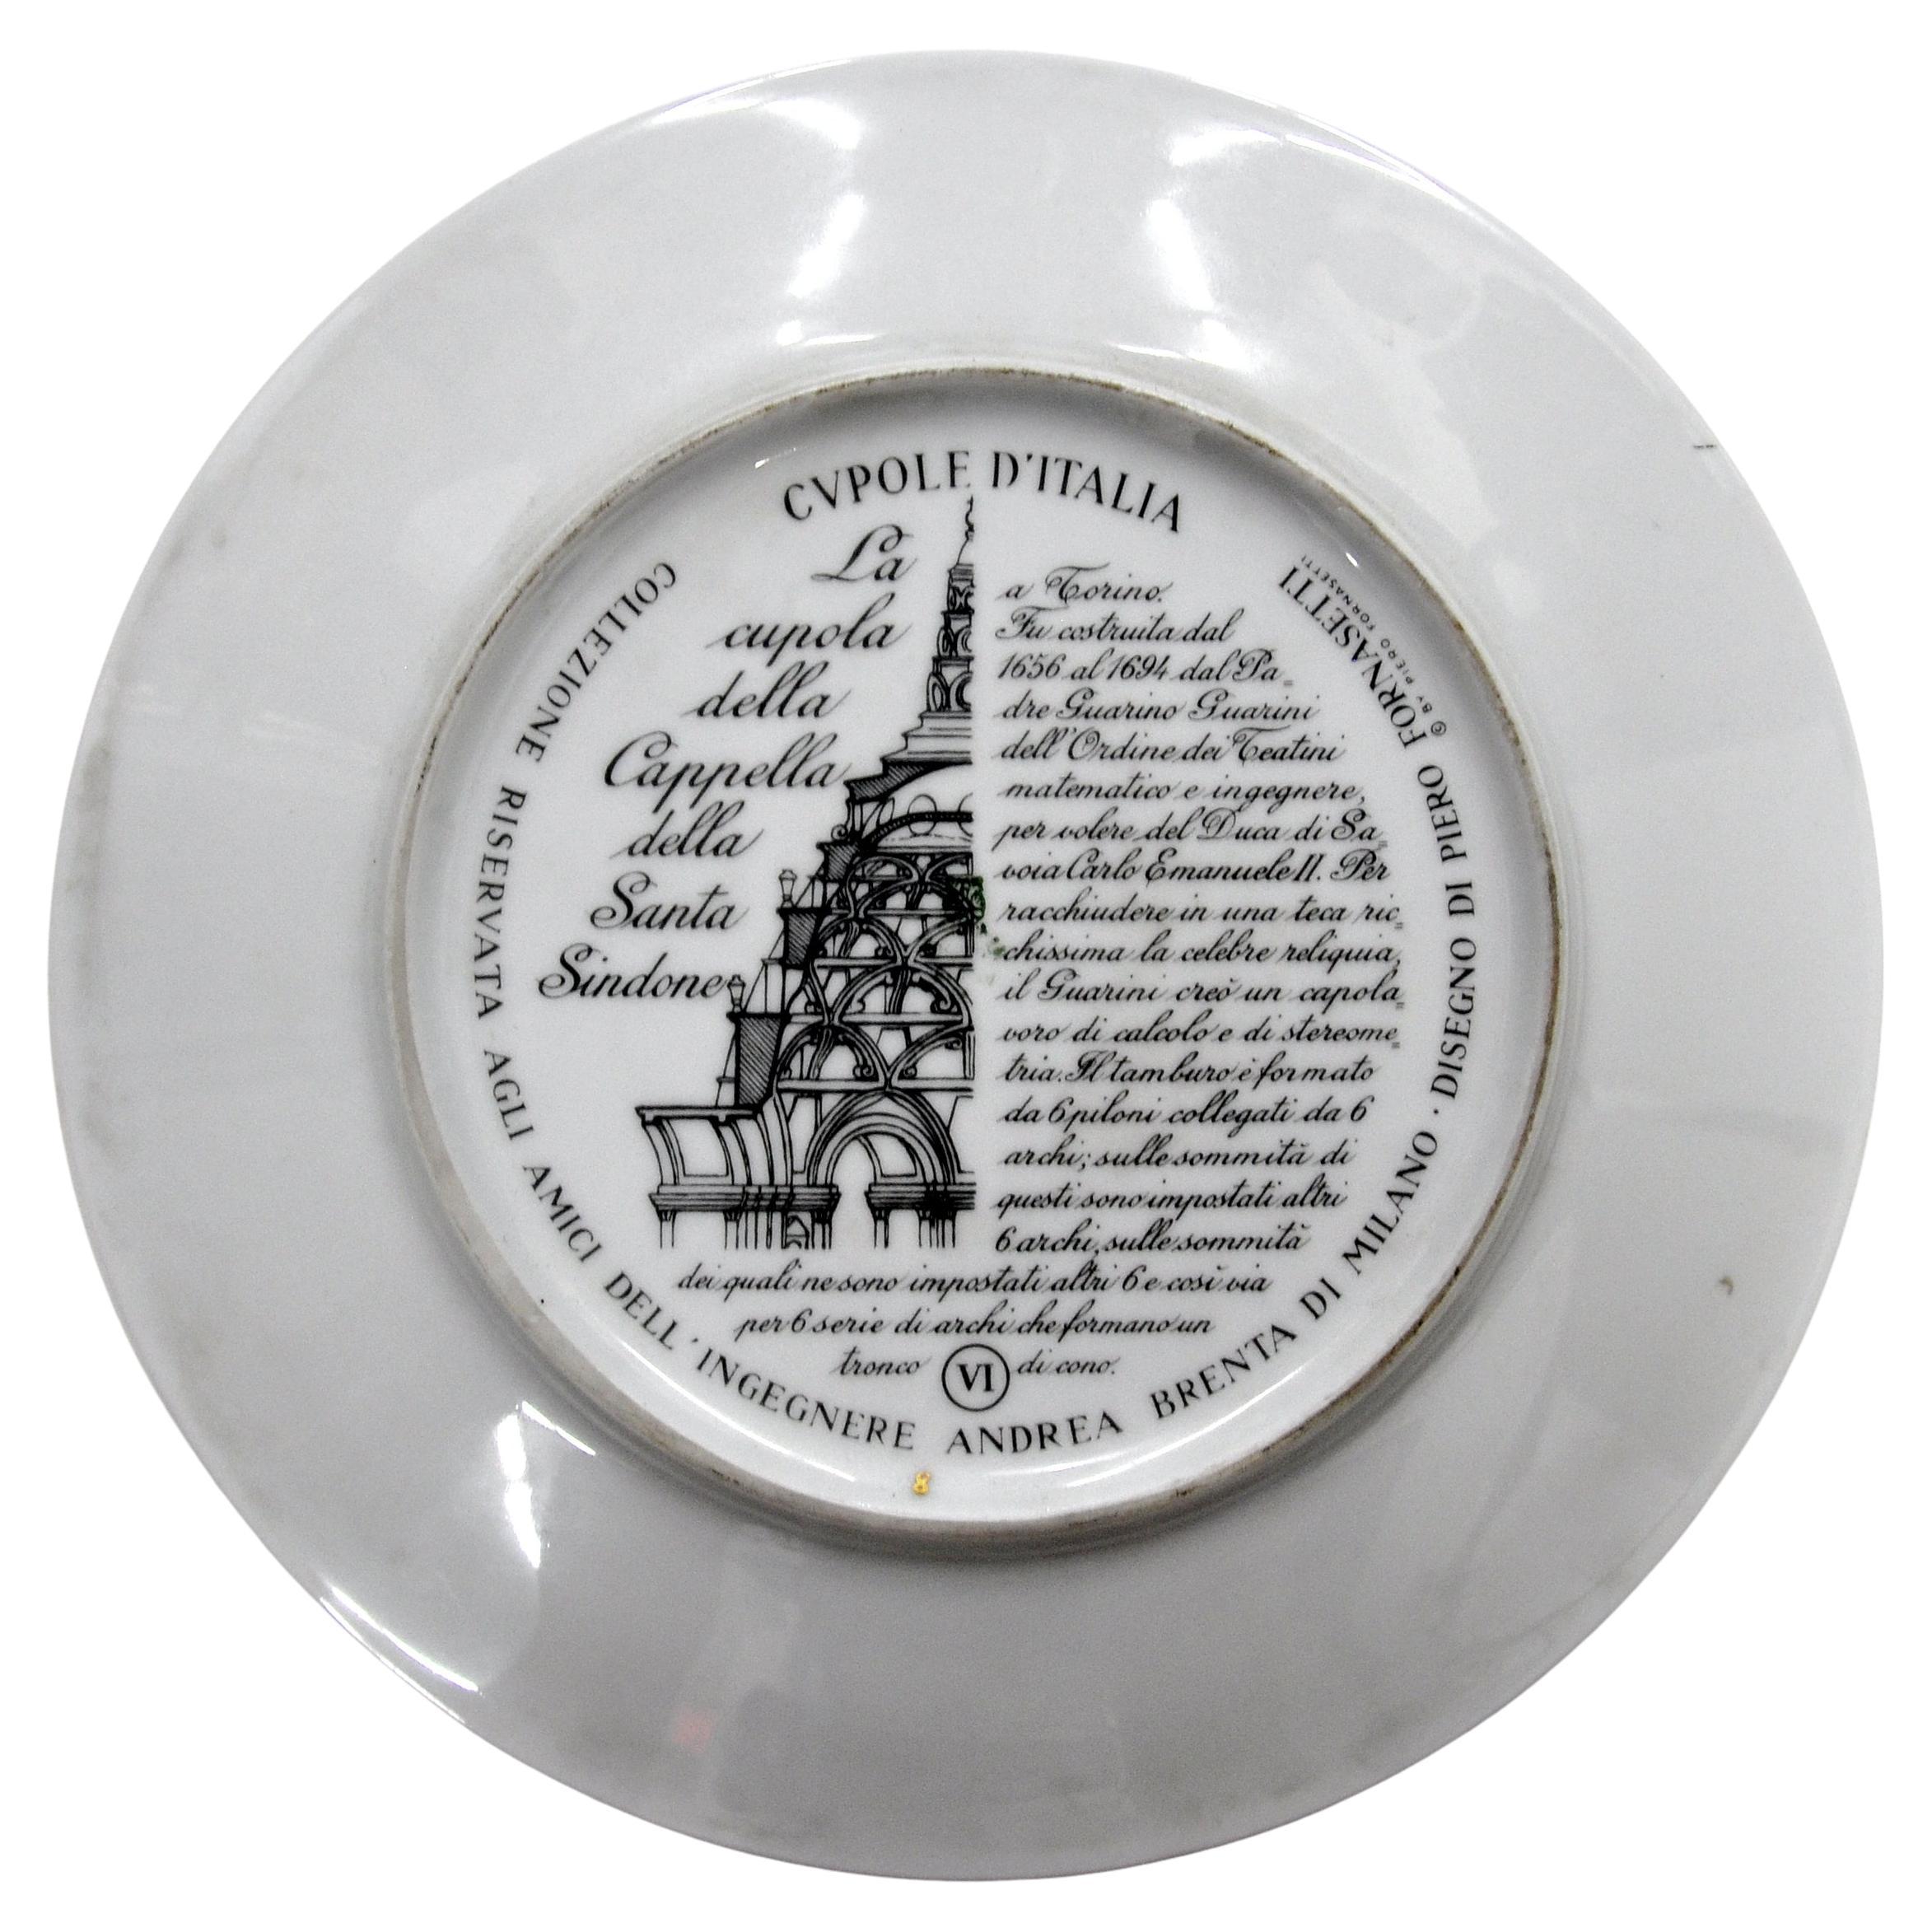 An original vintage decorative plate from the Cupole d'Italia series designed and manufactured by the Italian master of playful and surreal self-expression Piero Fornasetti in the 1960s. Fornasetti loved incorporating architectural elements in his